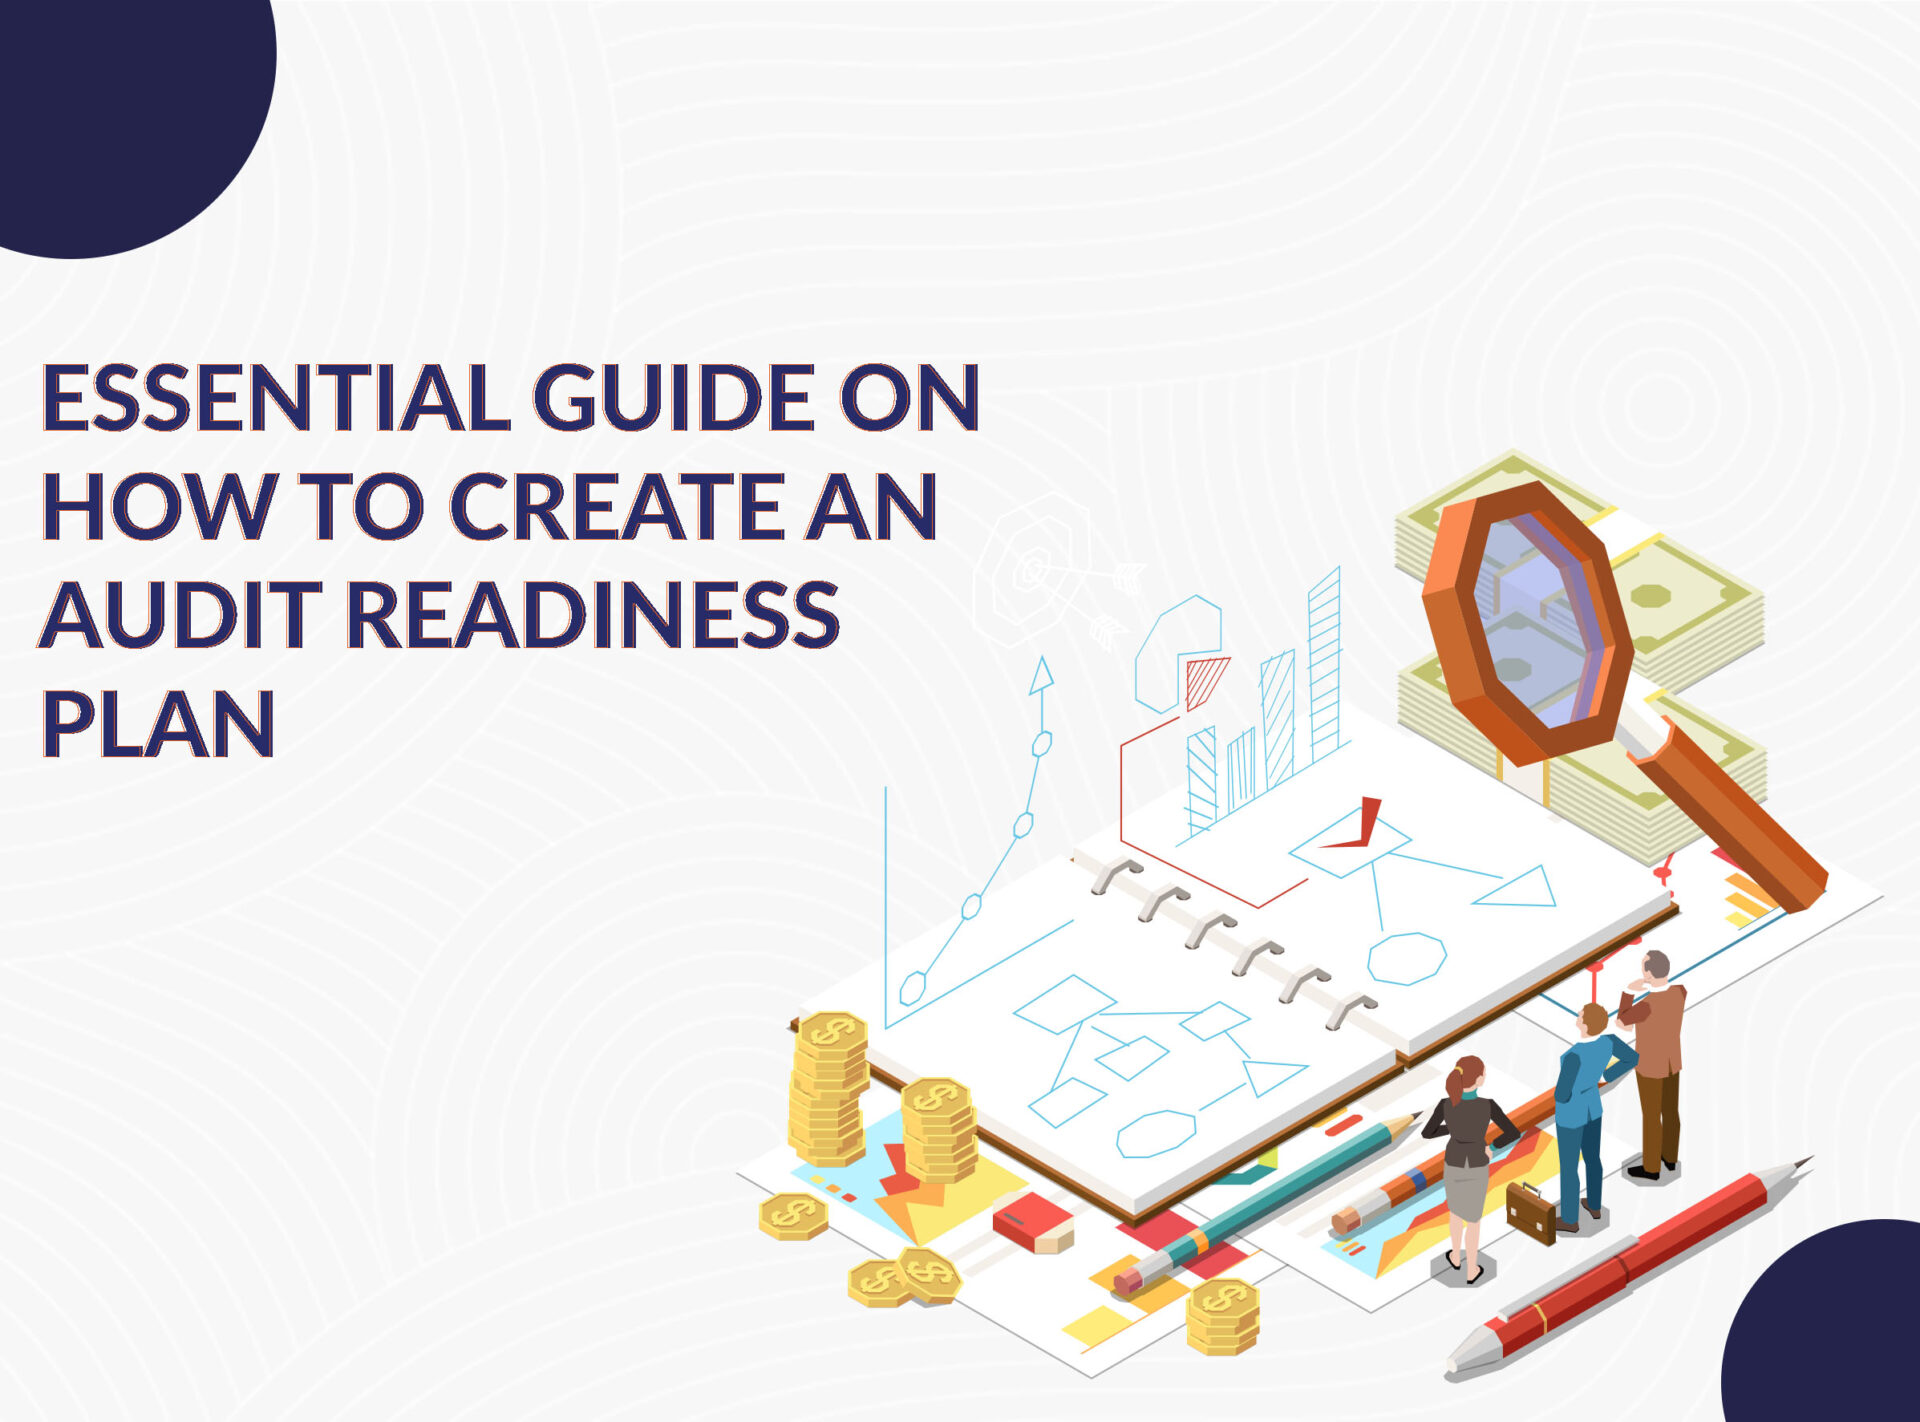 Essential Guide on How to Create an Audit Readiness Plan